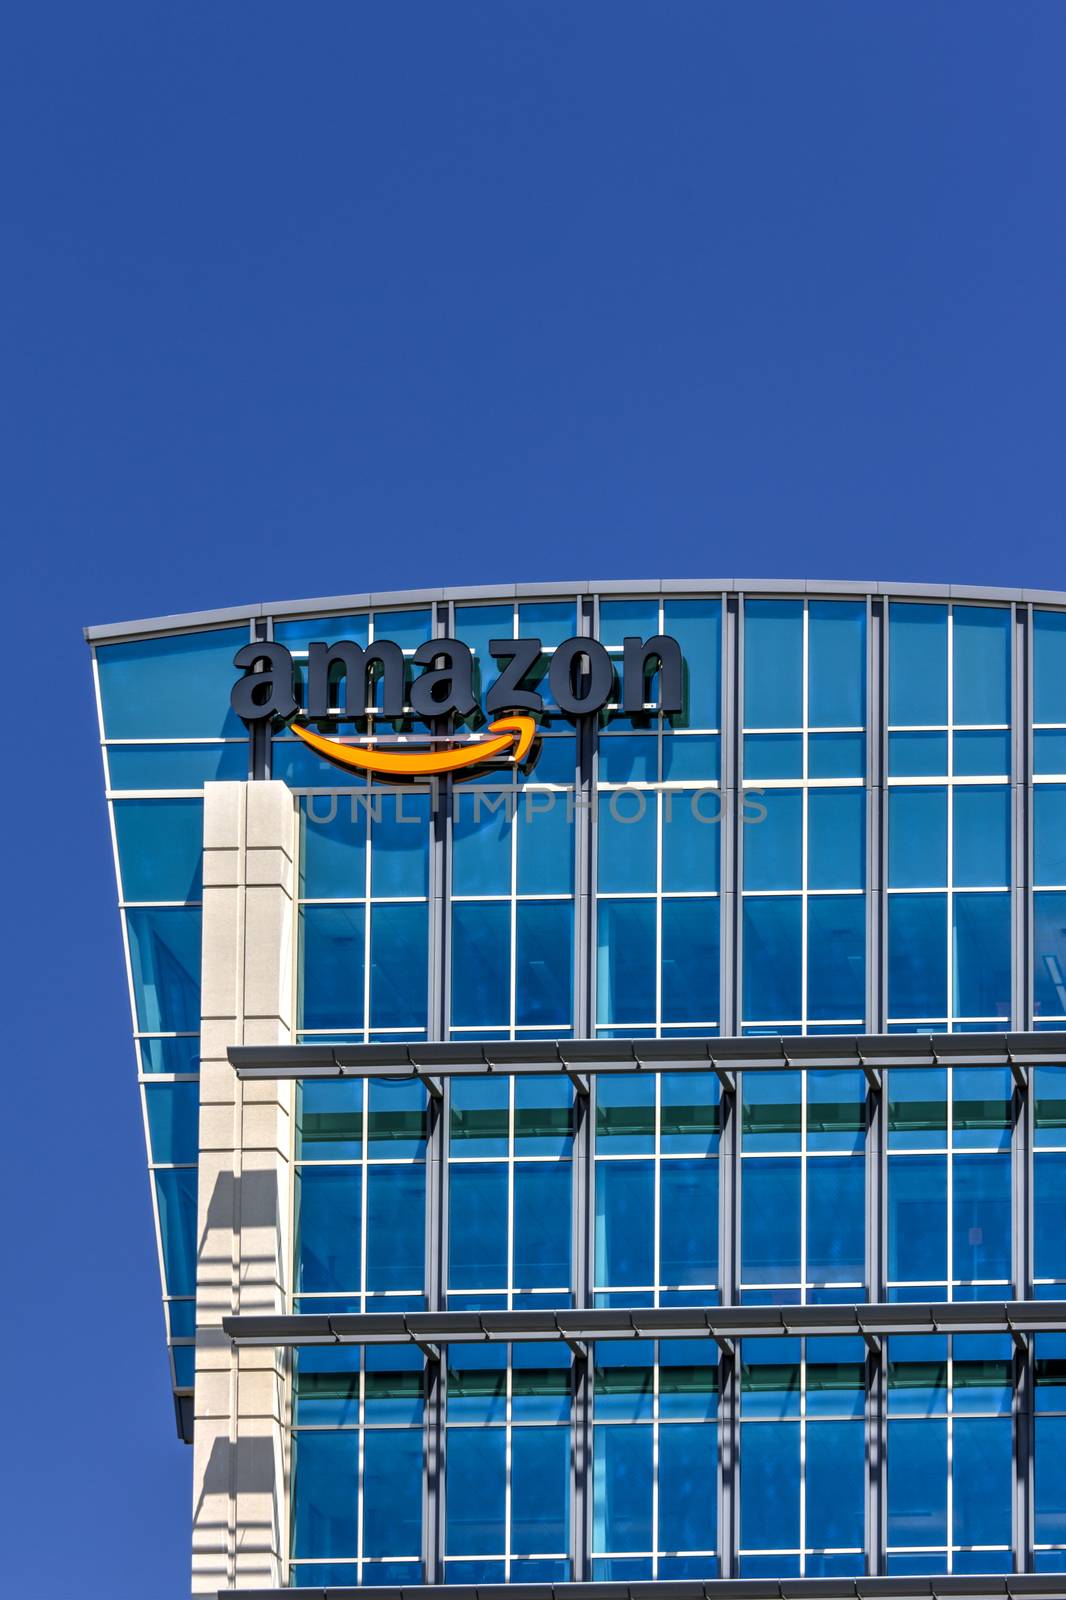 SANTA CLARA,CA/USA - MAY 11, 2014: Amazon building in Santa Clara, California.  Amazon is an American international electronic commerce company. It is the world's largest online retailer.